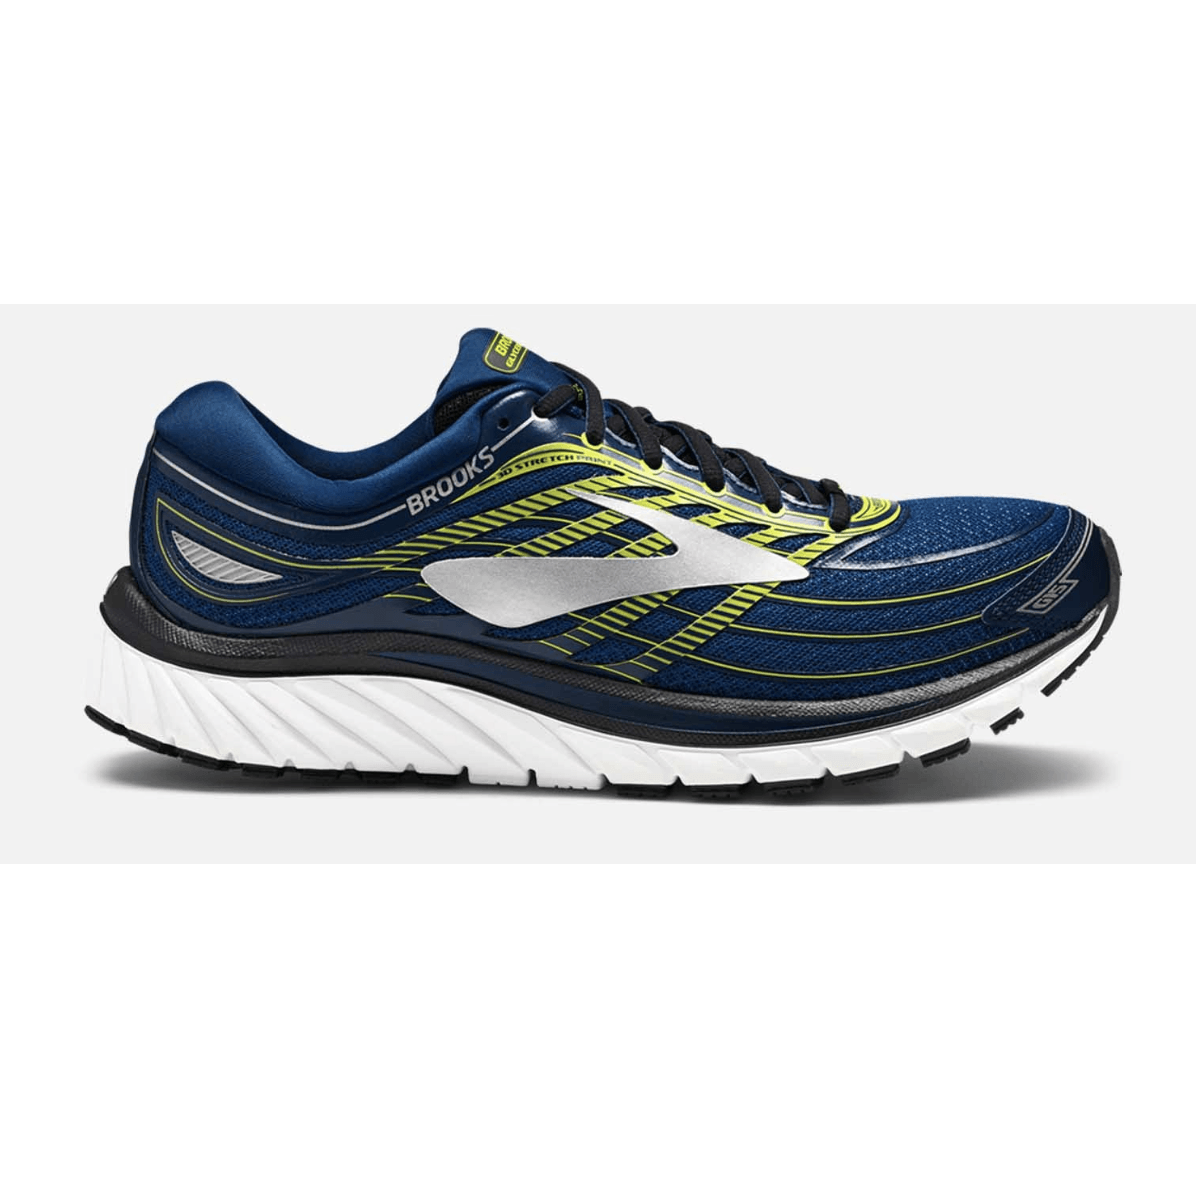 Chaussure Glycerin 15 blue/lime/silver 2018